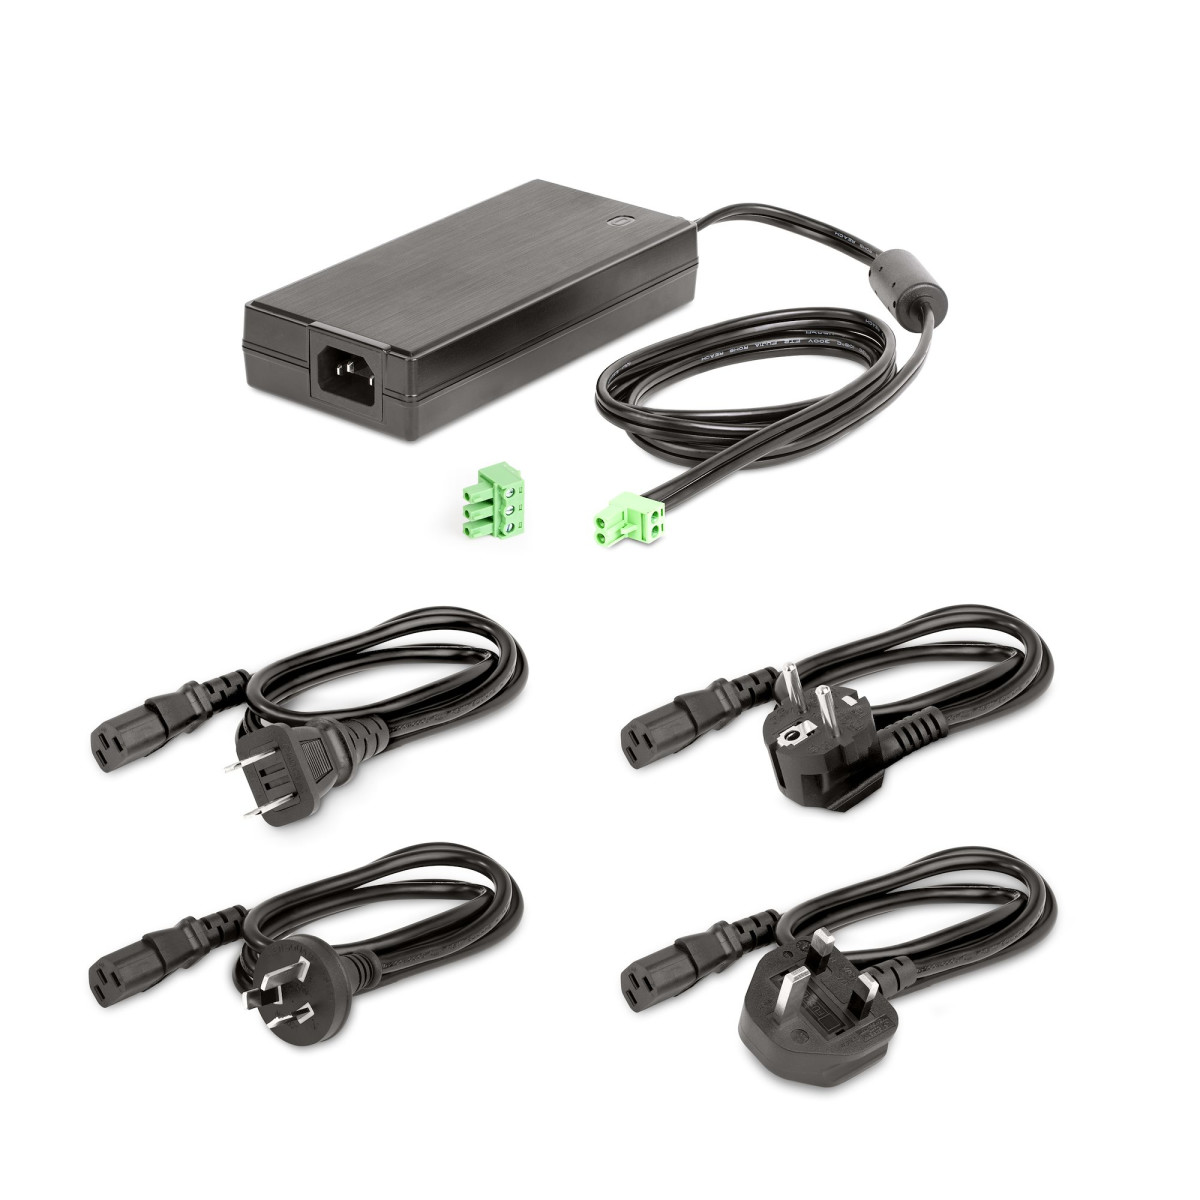 AC/DC Power Adapter/Supply For USB Hubs